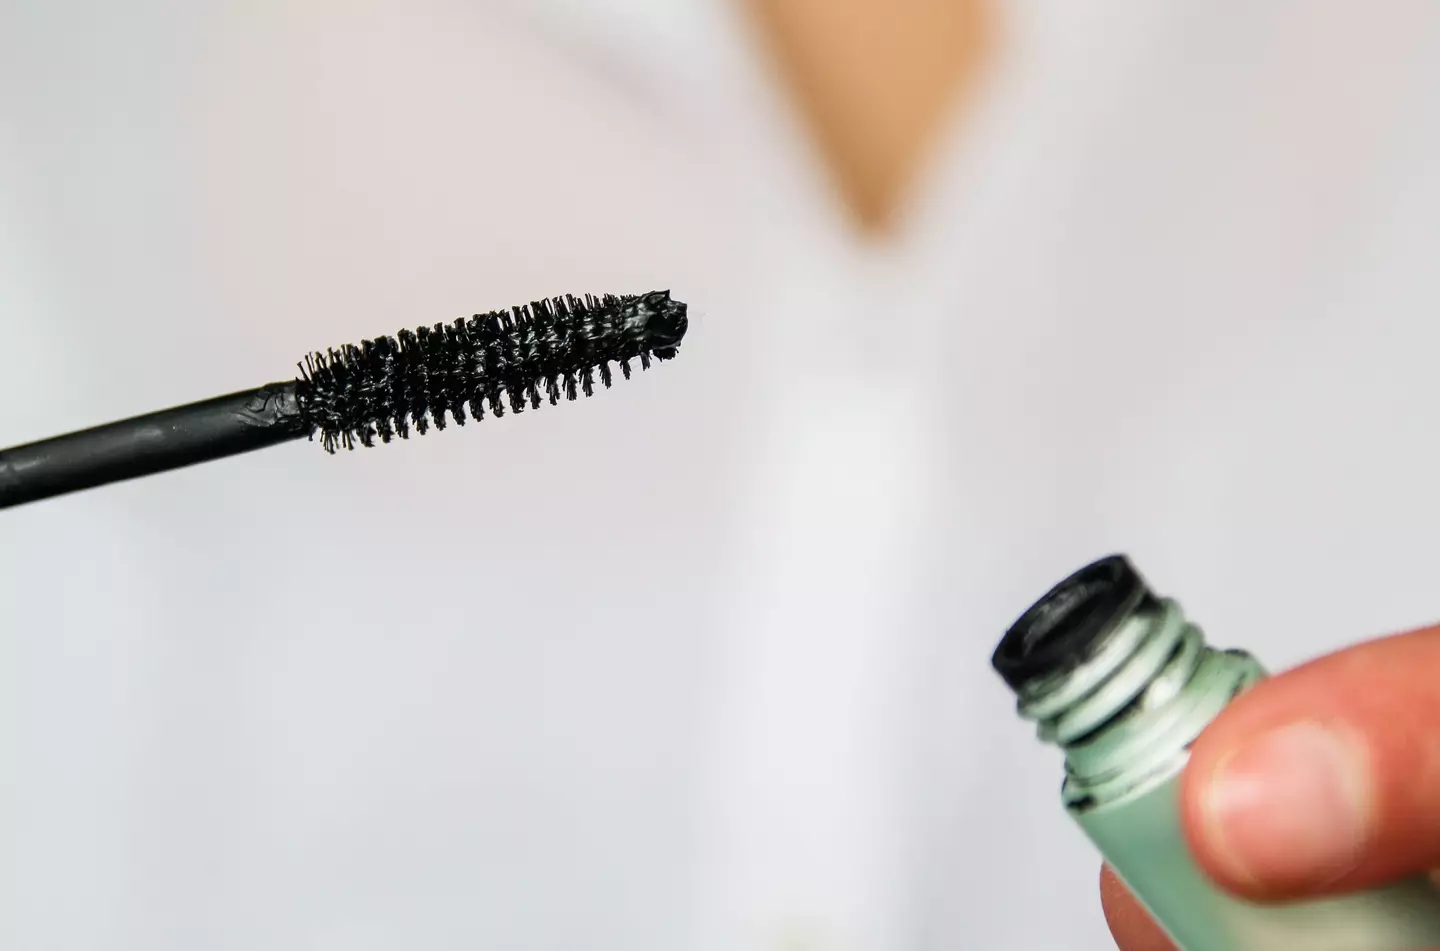 There's all kinds of stuff inside a mascara bottle.